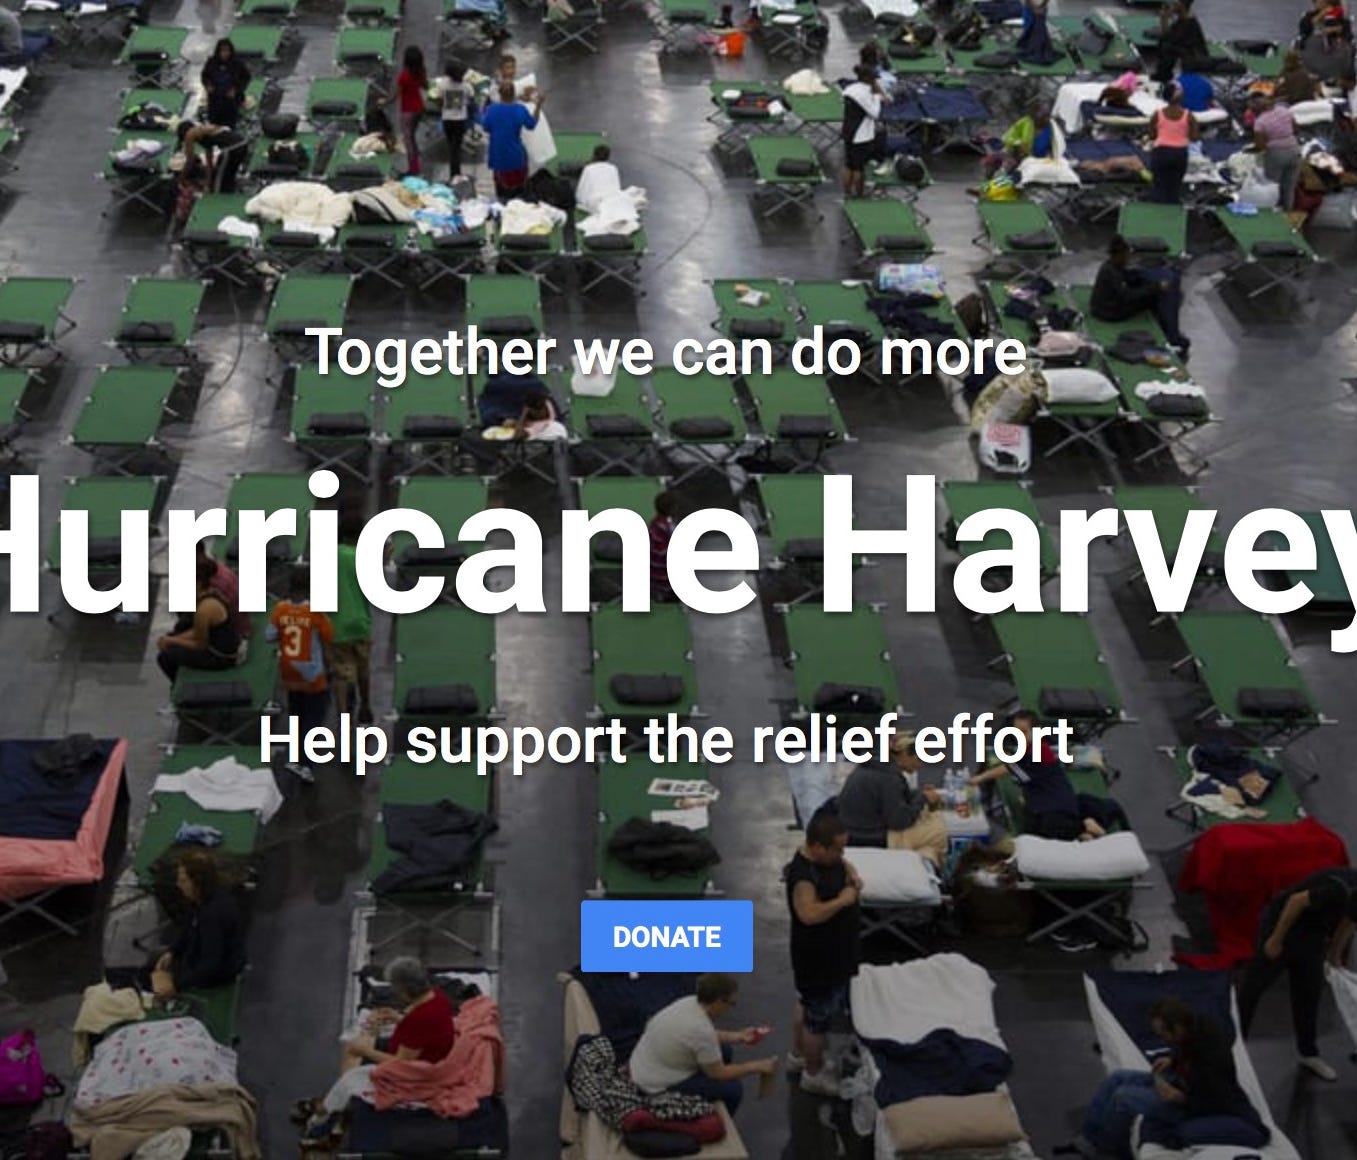 Google was one of several tech companies that launched fundraising efforts to aid those affected by Hurricane Harvey.